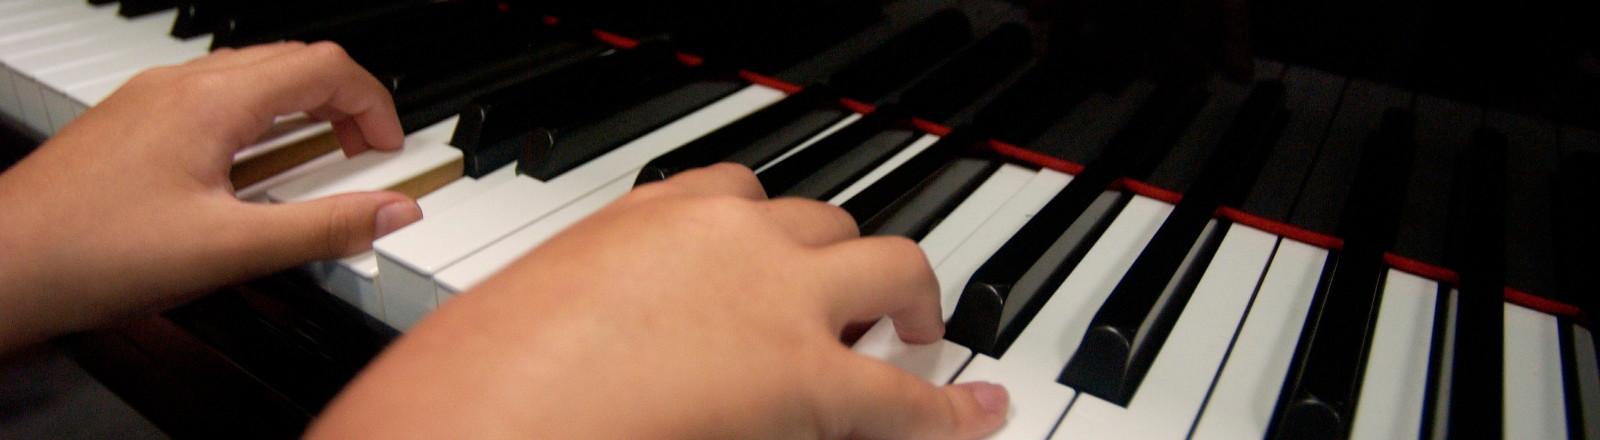 The hands of a child playing the paino